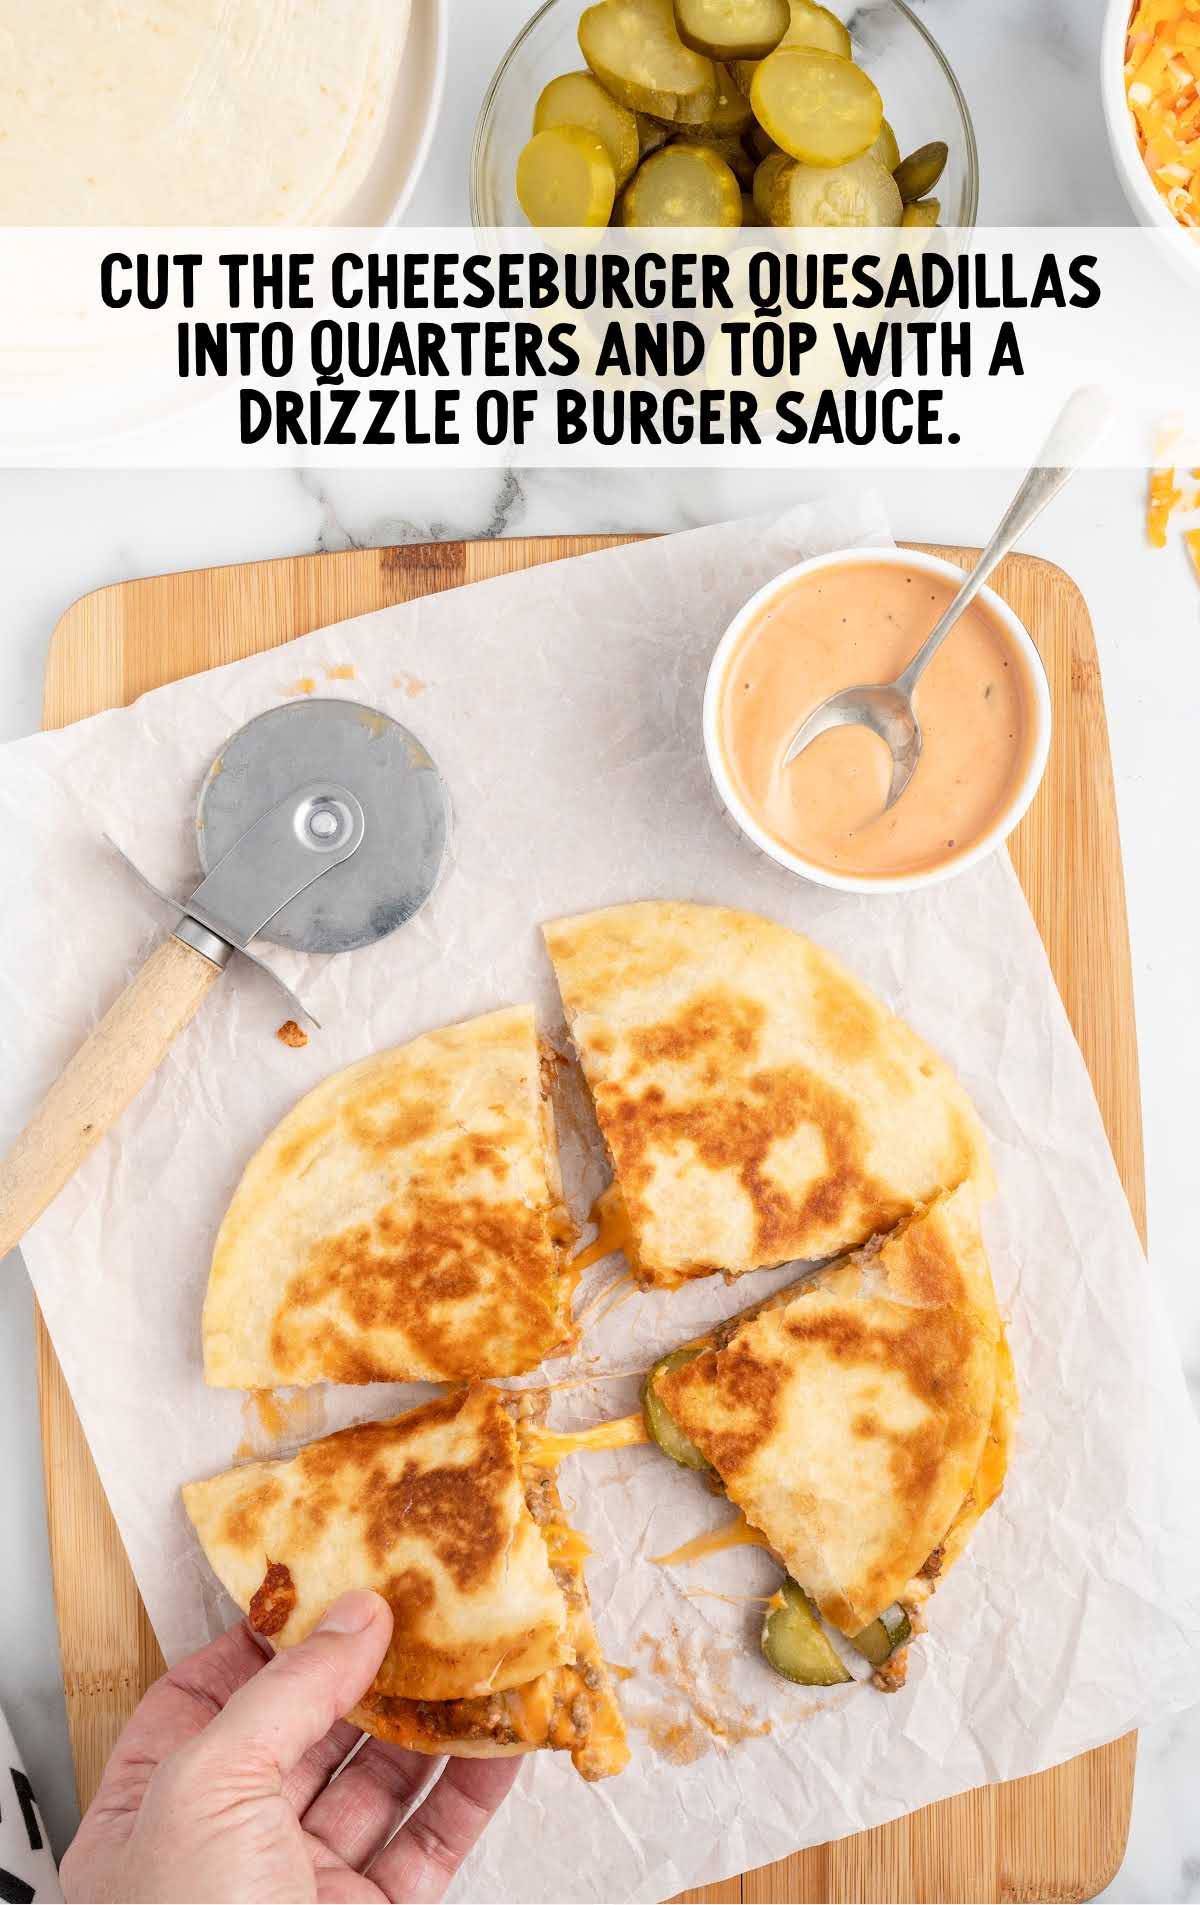 cheeseburger quesadillas cut into quarters and drizzled with burger sauce